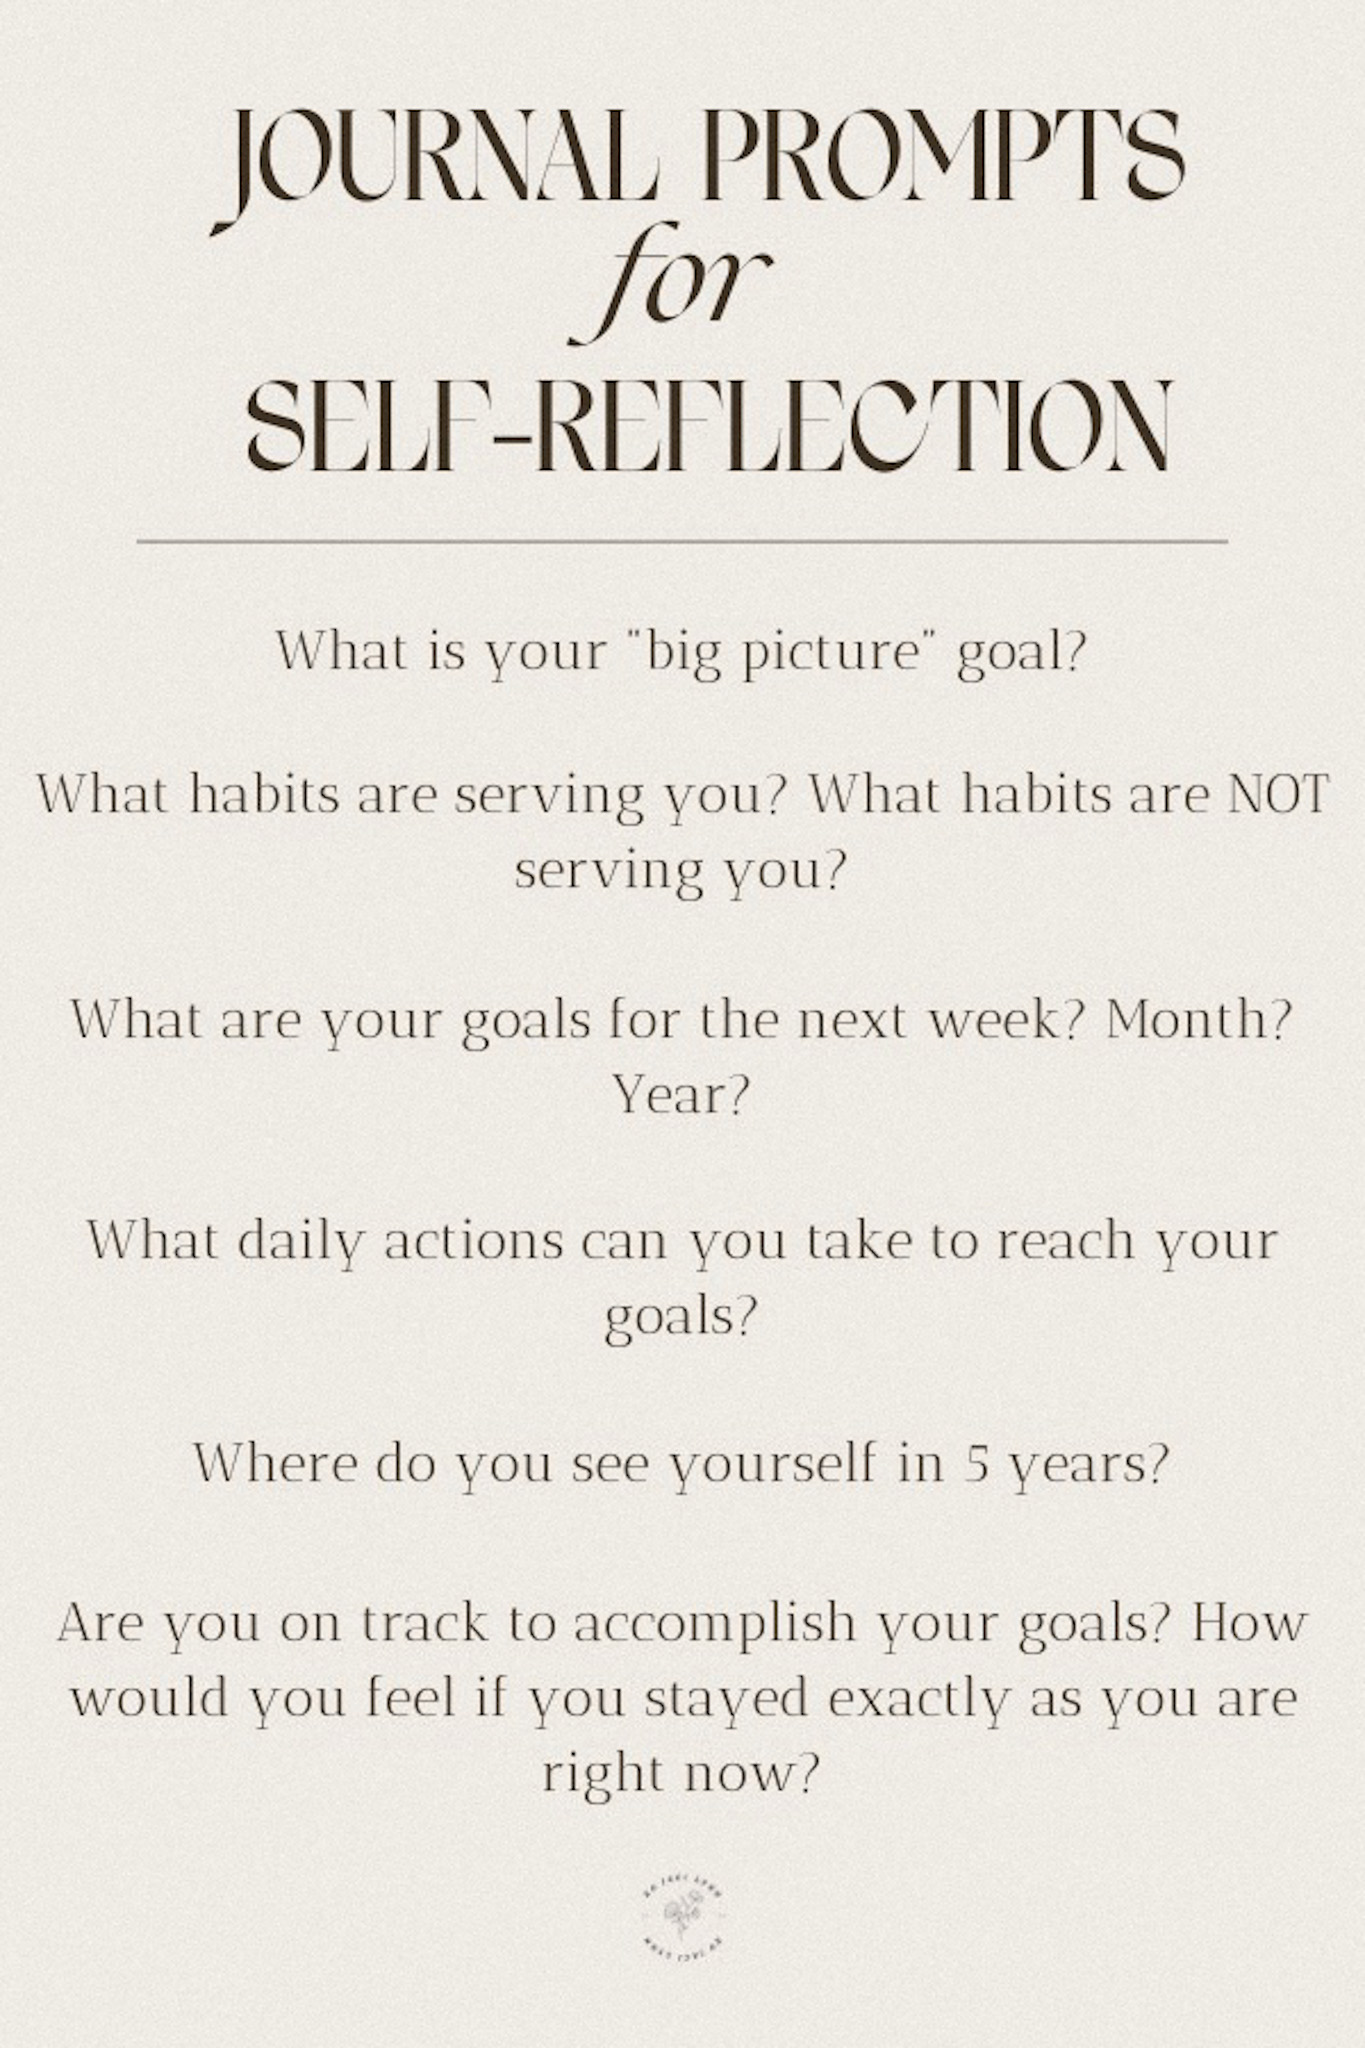 The 5 BEST Journal Prompts for Self-Reflection - xo, jaci lynn